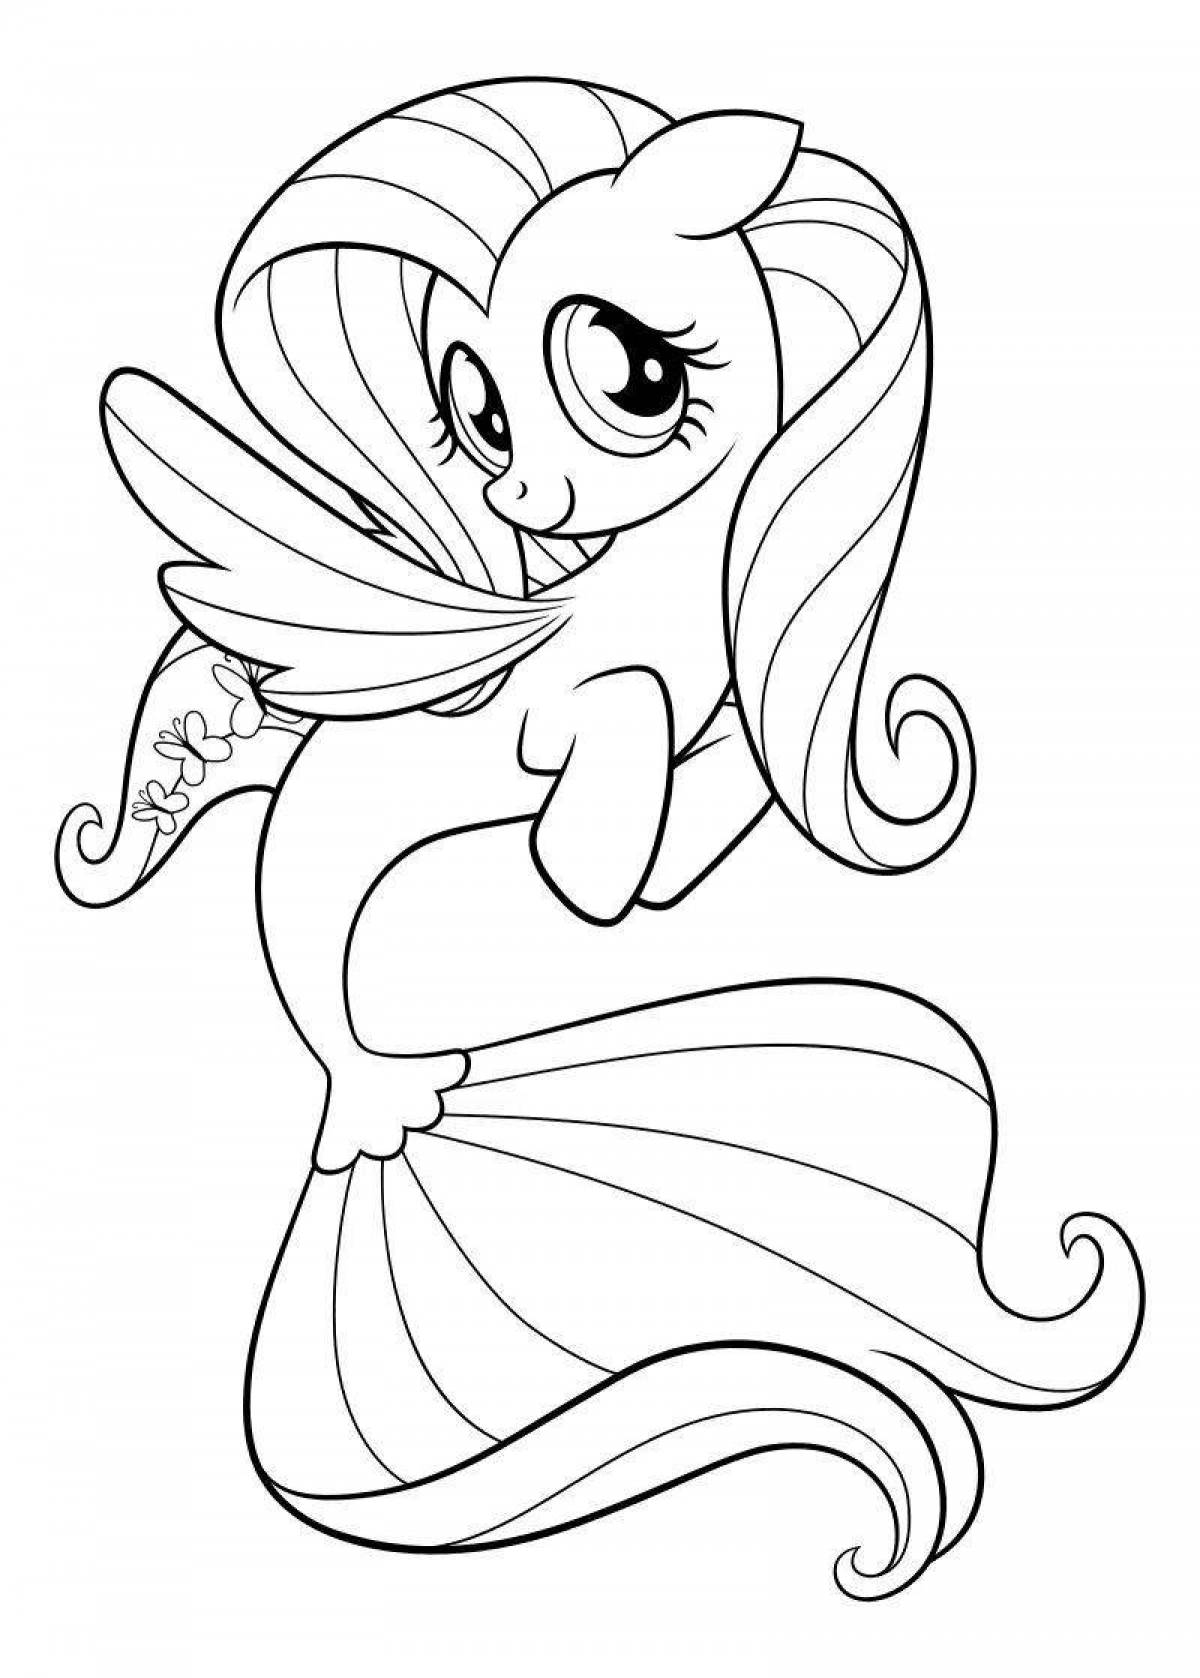 Serendipitous water shine coloring page